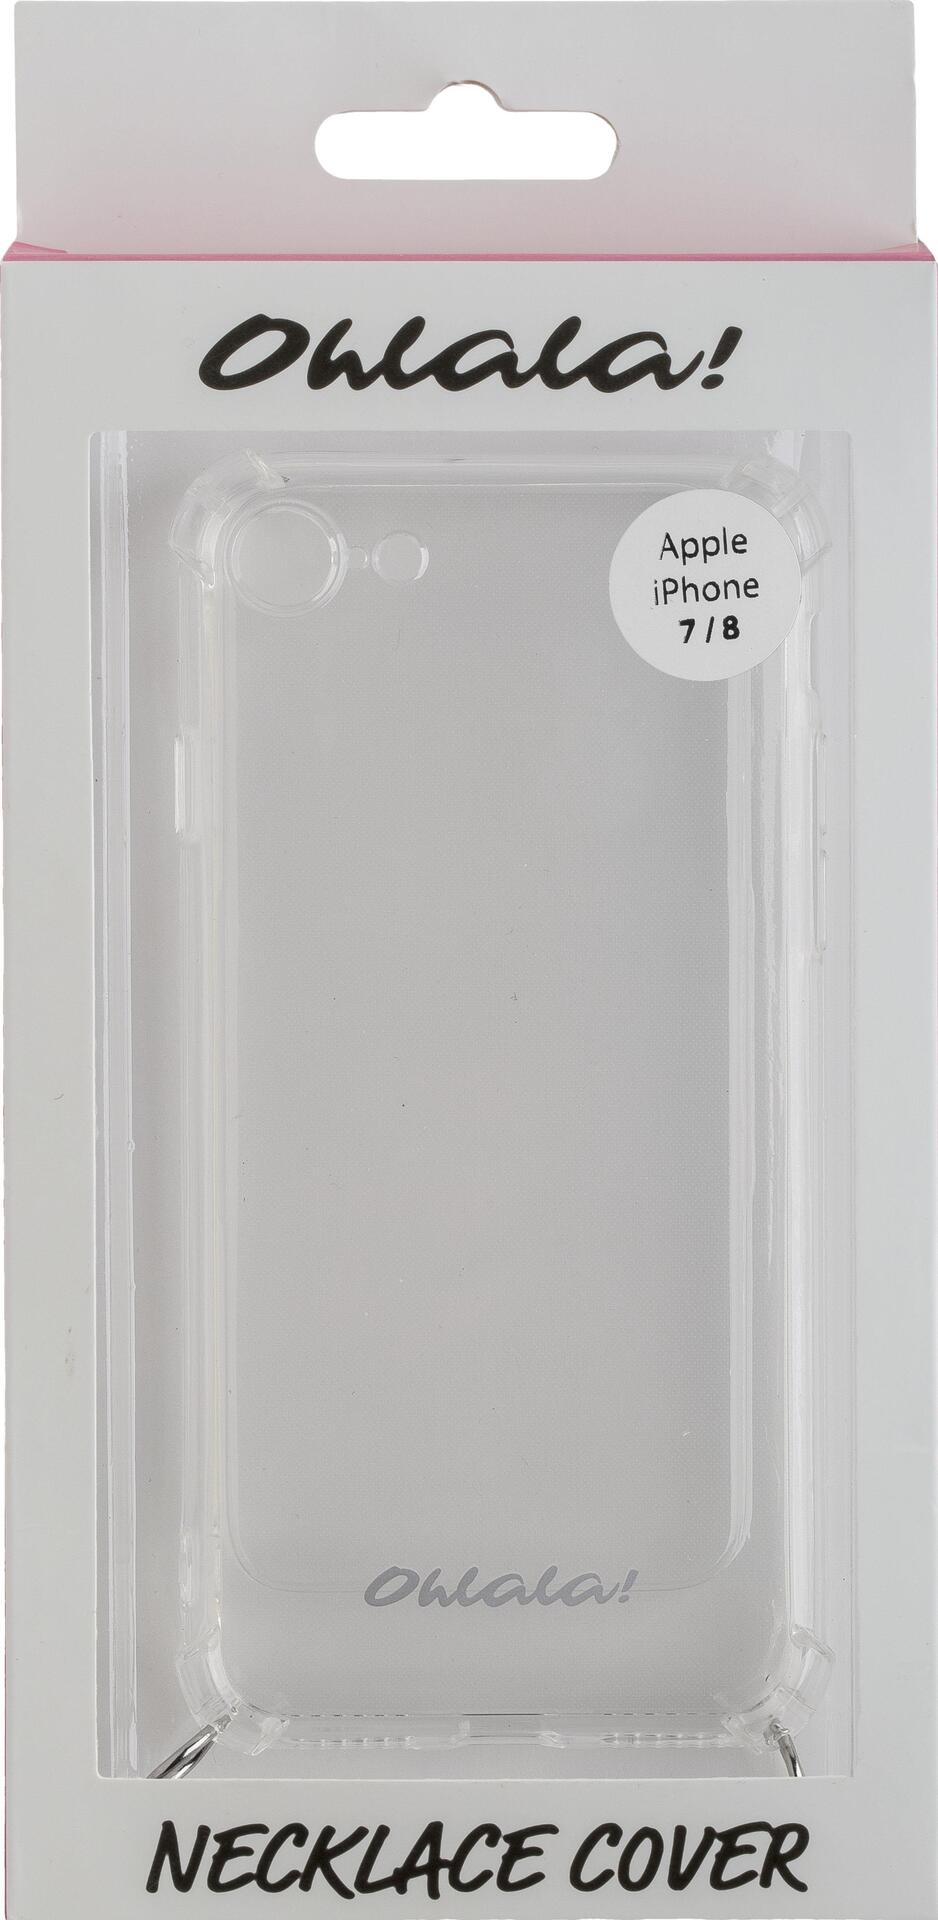 PETER JÄCKEL OHLALA! NECKLACE Cover Clear für Apple iPhone 7/ 8 (17561)